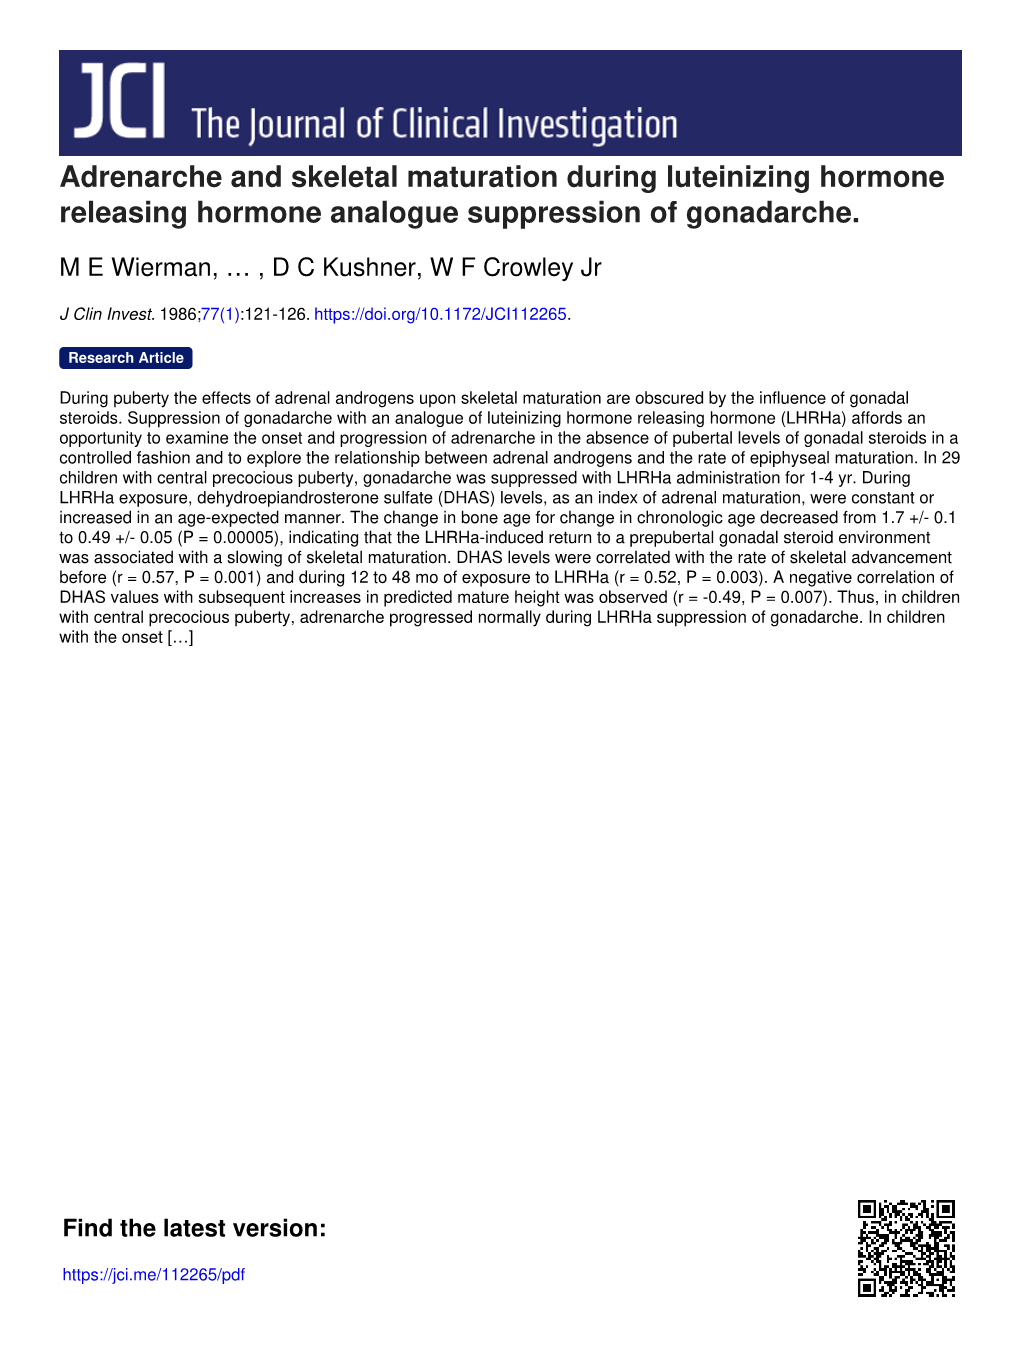 Adrenarche and Skeletal Maturation During Luteinizing Hormone Releasing Hormone Analogue Suppression of Gonadarche